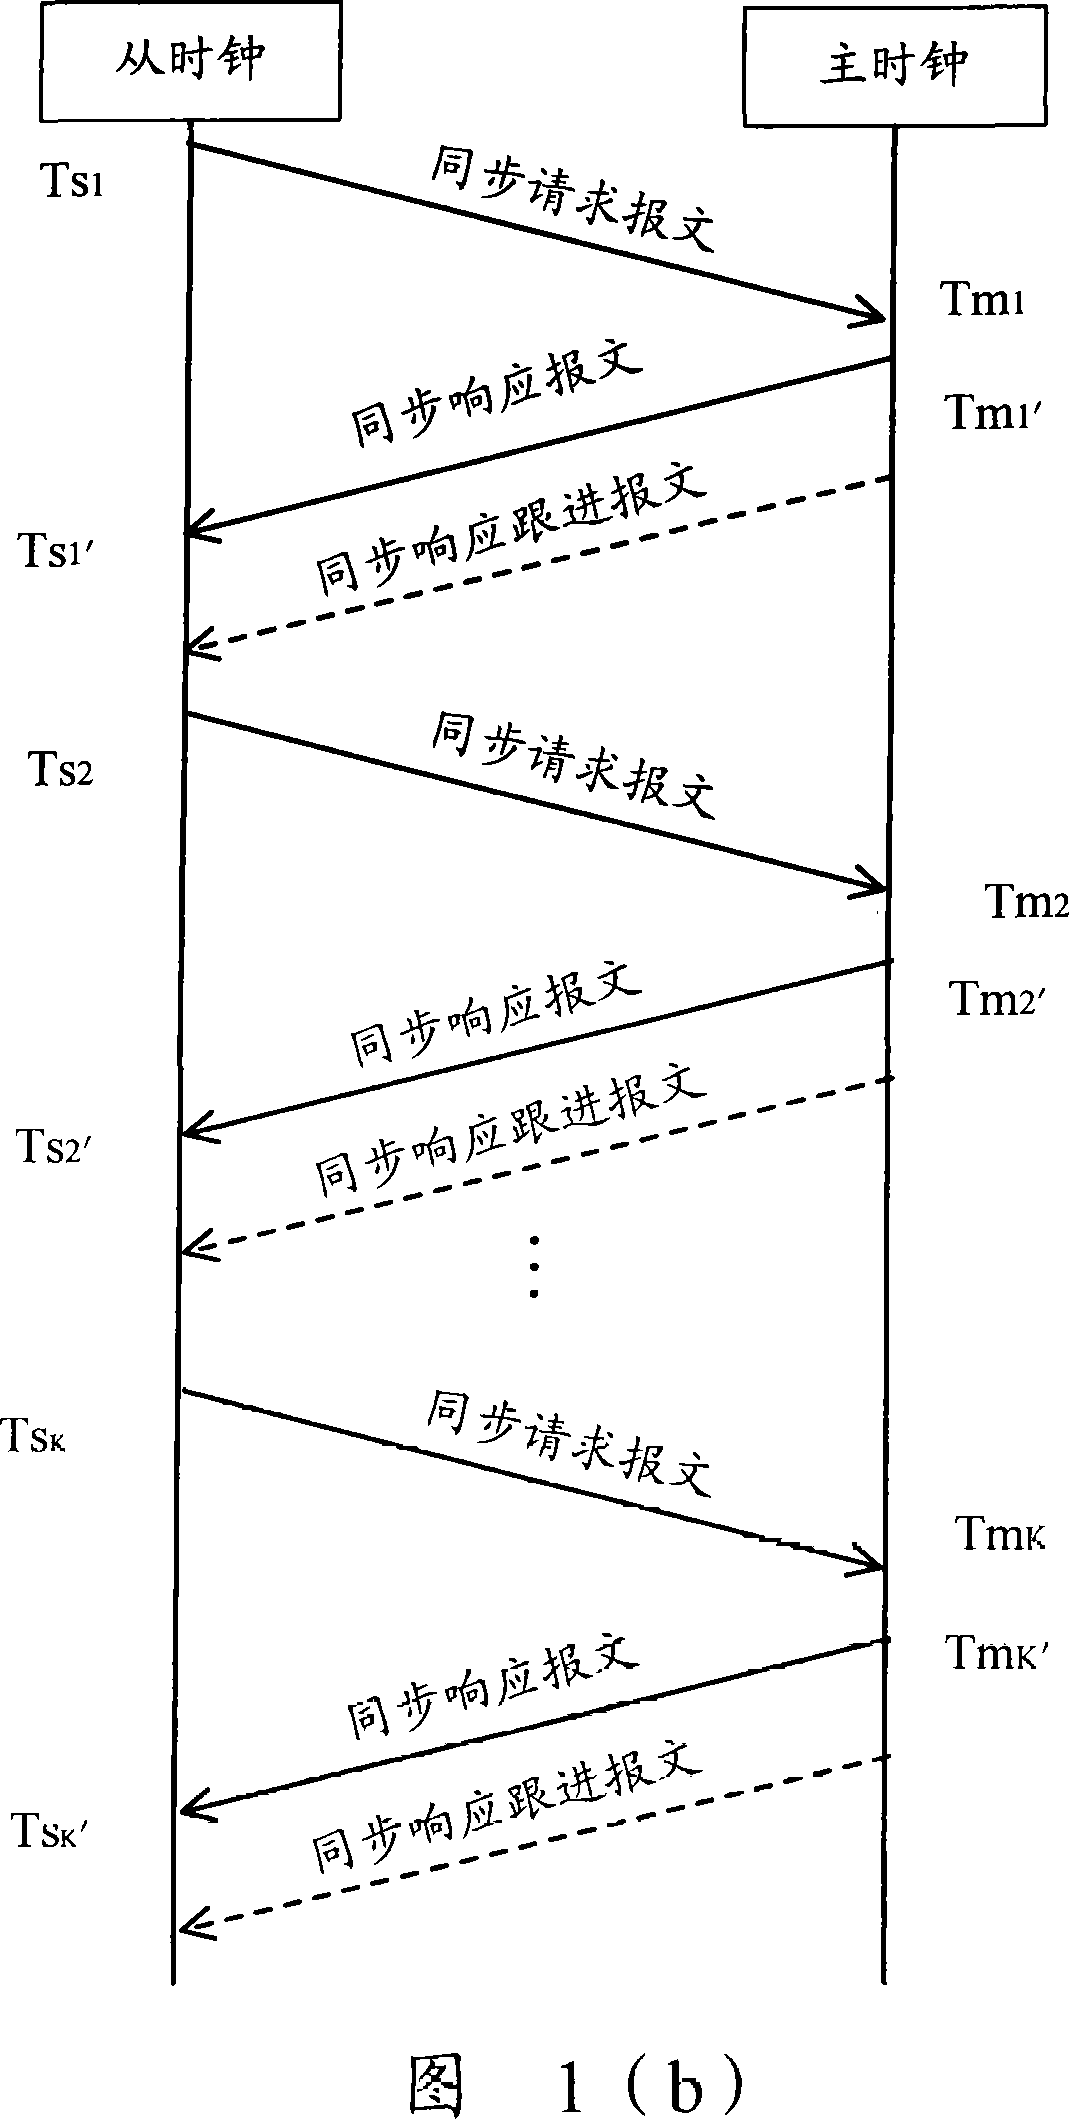 Method and apparatus for master-salve clock synchronization